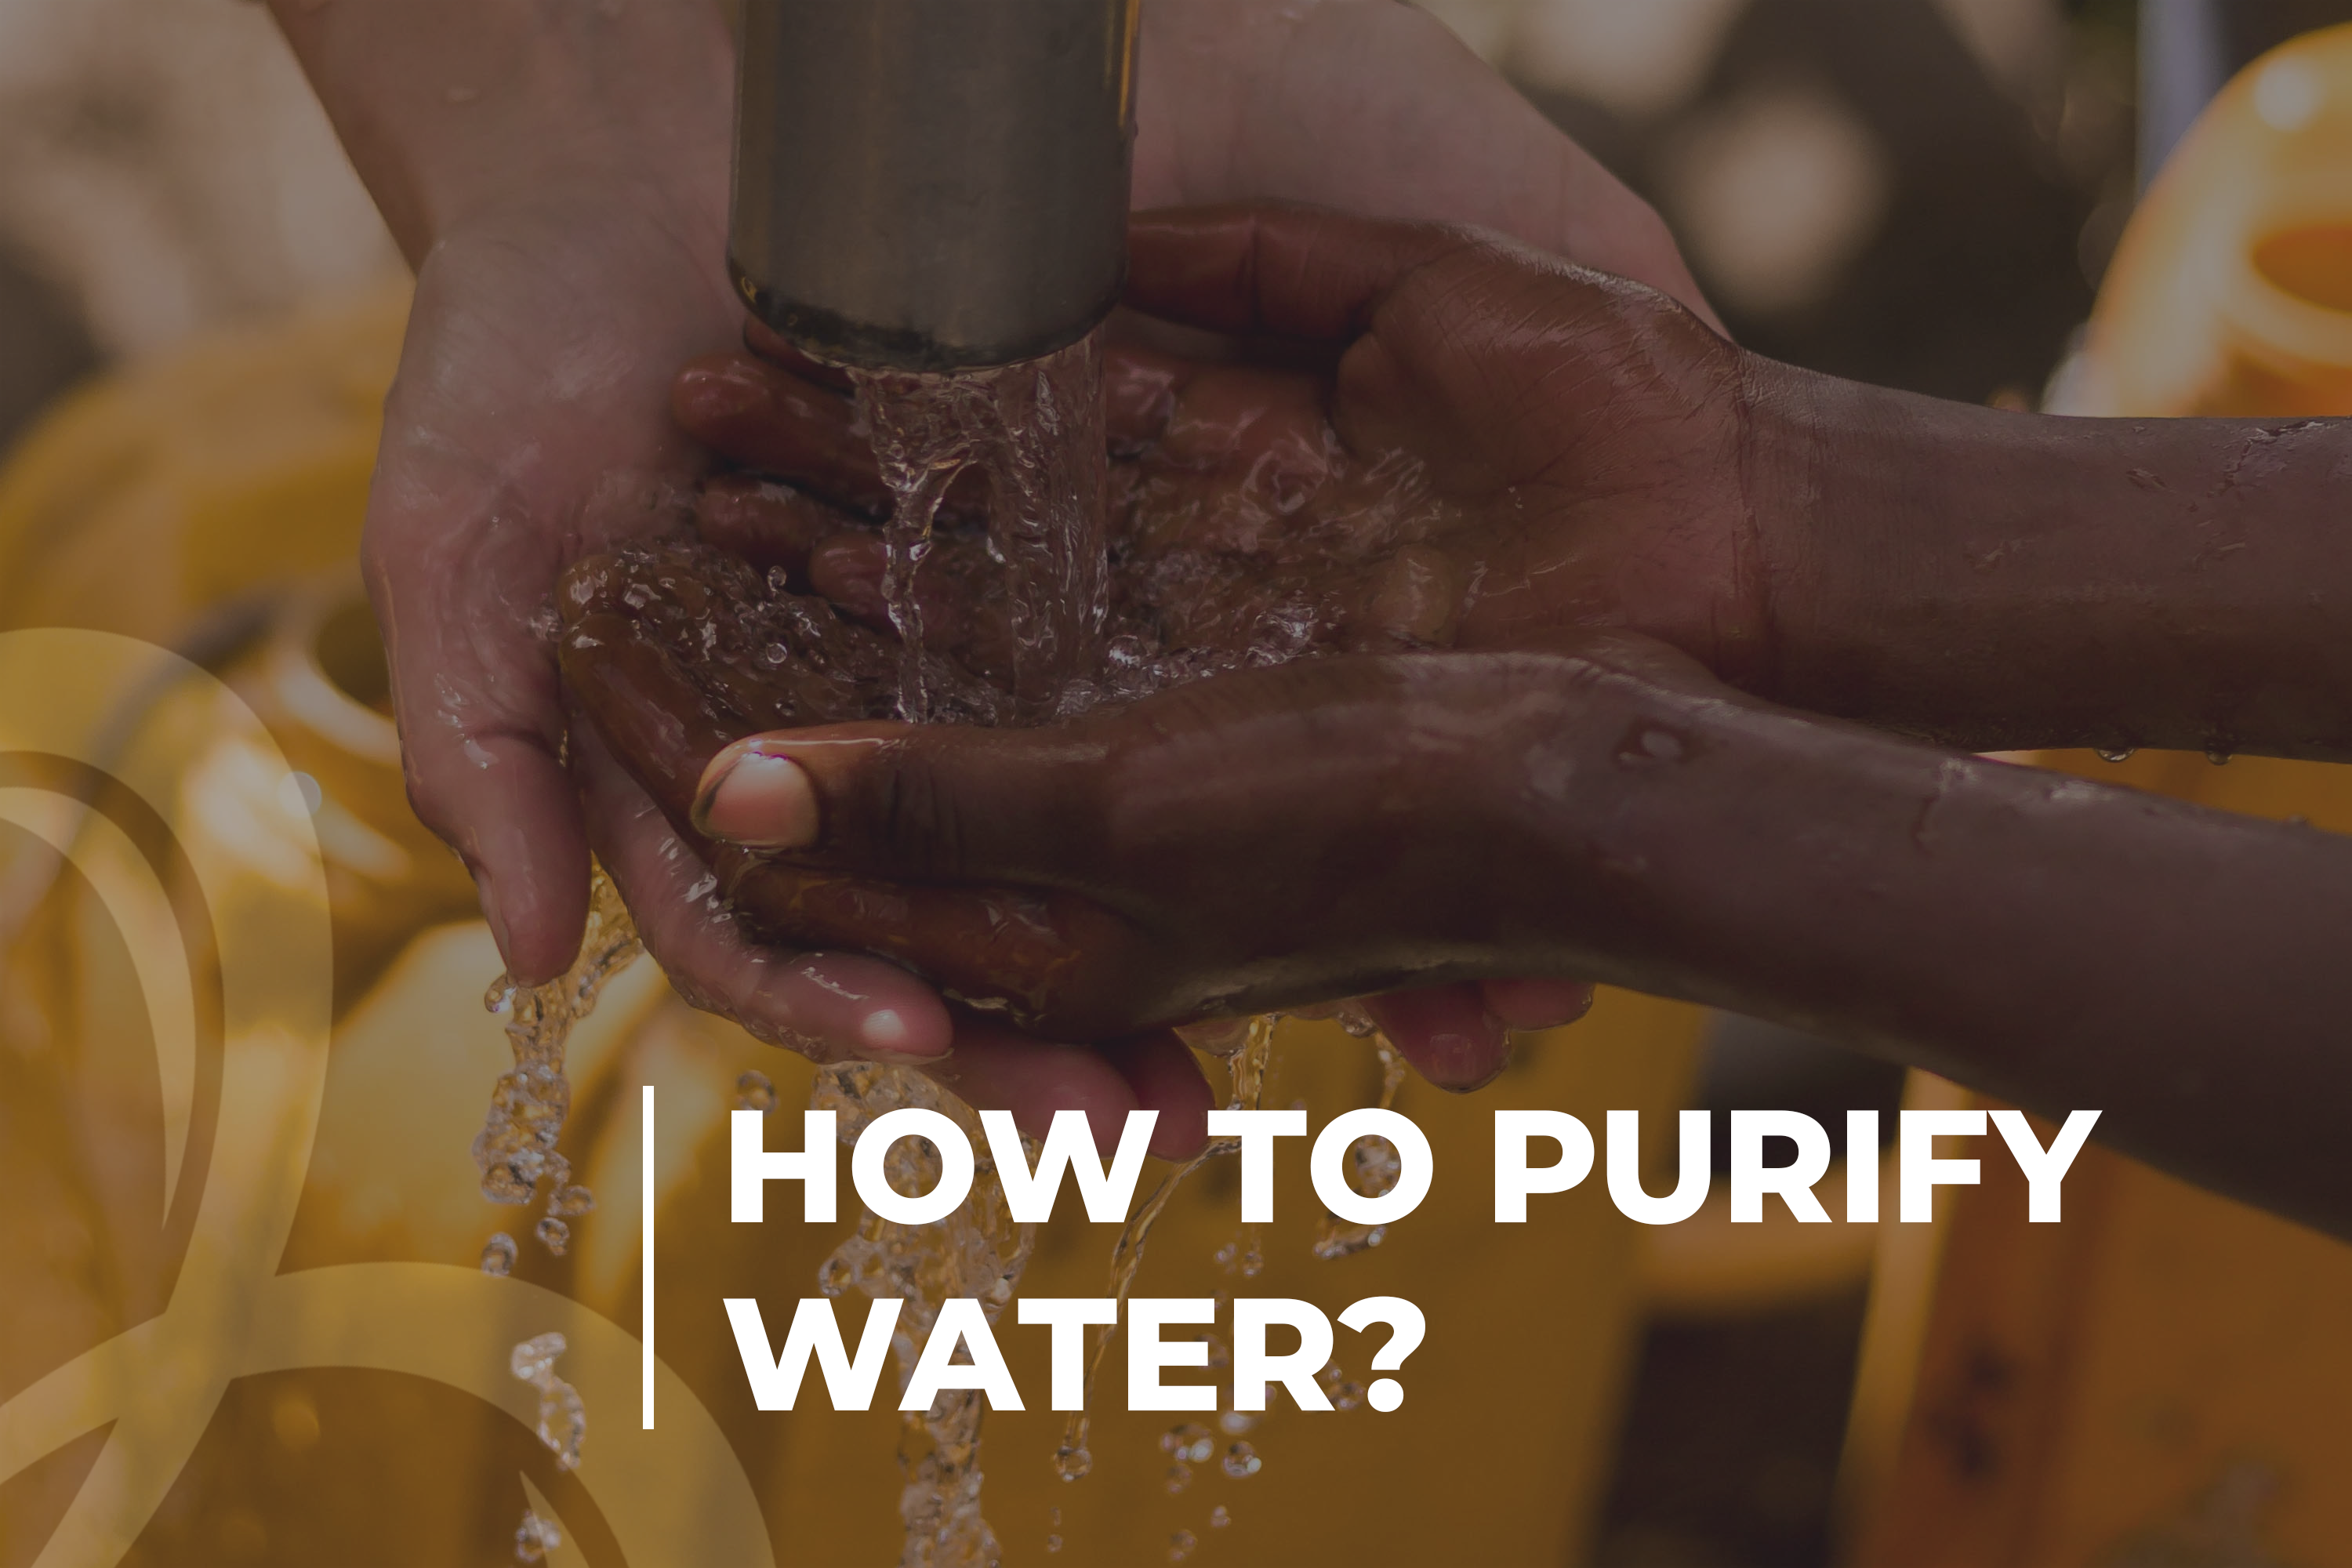 How to purify water